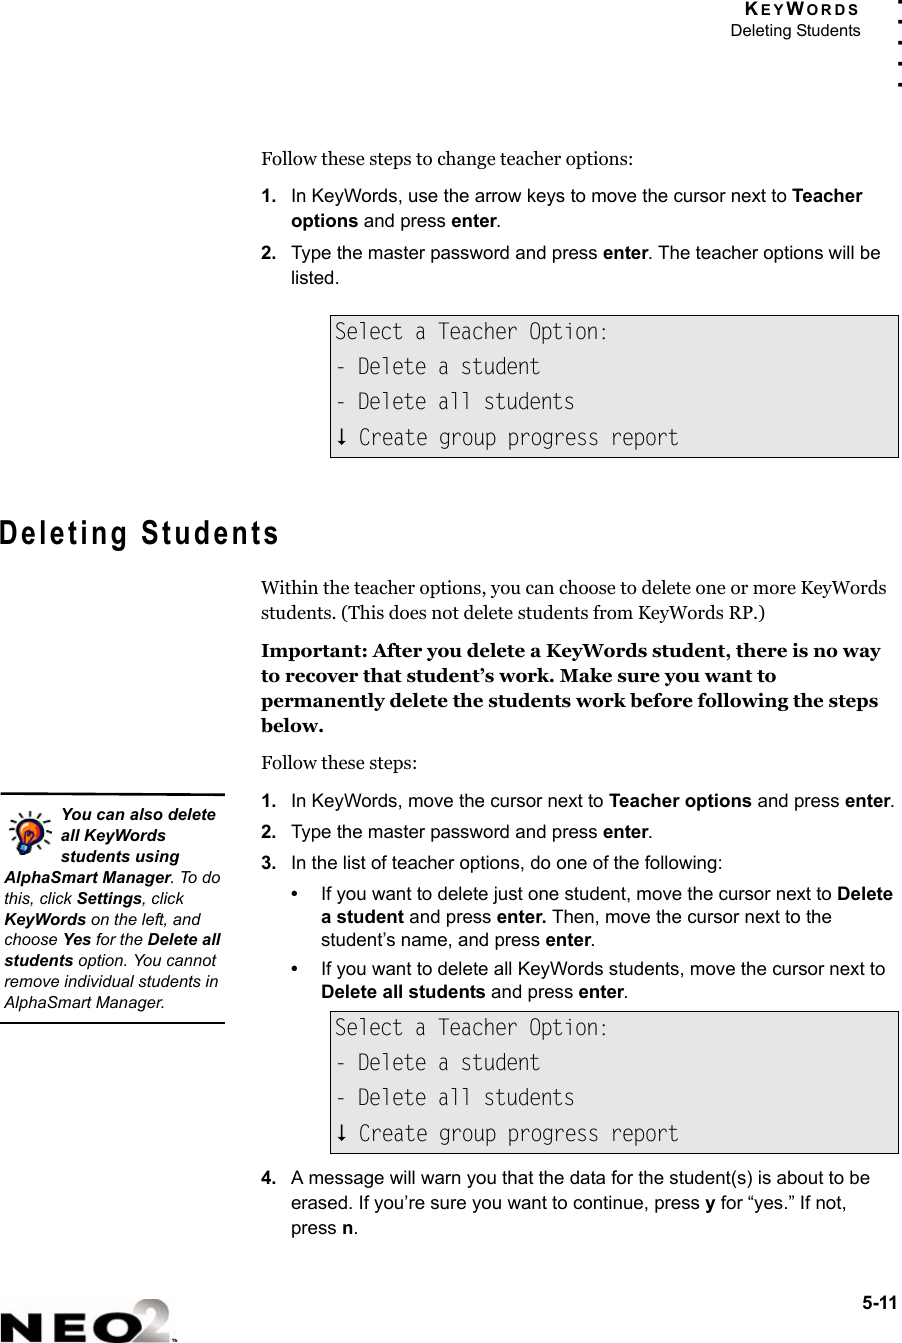 KEYWORDSDeleting Students5-11. . . . .Follow these steps to change teacher options:1. In KeyWords, use the arrow keys to move the cursor next to Teacher options and press enter.2. Type the master password and press enter. The teacher options will be listed.Deleting StudentsWithin the teacher options, you can choose to delete one or more KeyWords students. (This does not delete students from KeyWords RP.)Important: After you delete a KeyWords student, there is no way to recover that student’s work. Make sure you want to permanently delete the students work before following the steps below.Follow these steps:1. In KeyWords, move the cursor next to Teacher options and press enter.2. Type the master password and press enter.3. In the list of teacher options, do one of the following:•If you want to delete just one student, move the cursor next to Delete a student and press enter. Then, move the cursor next to the student’s name, and press enter.•If you want to delete all KeyWords students, move the cursor next to Delete all students and press enter.4. A message will warn you that the data for the student(s) is about to be erased. If you’re sure you want to continue, press y for “yes.” If not,press n.Select a Teacher Option:- Delete a student- Delete all students Create group progress reportSelect a Teacher Option:- Delete a student- Delete all students Create group progress reportYou can also delete all KeyWords students using AlphaSmart Manager. To do this, click Settings, click KeyWords on the left, and choose Yes for the Delete all students option. You cannot remove individual students in AlphaSmart Manager.